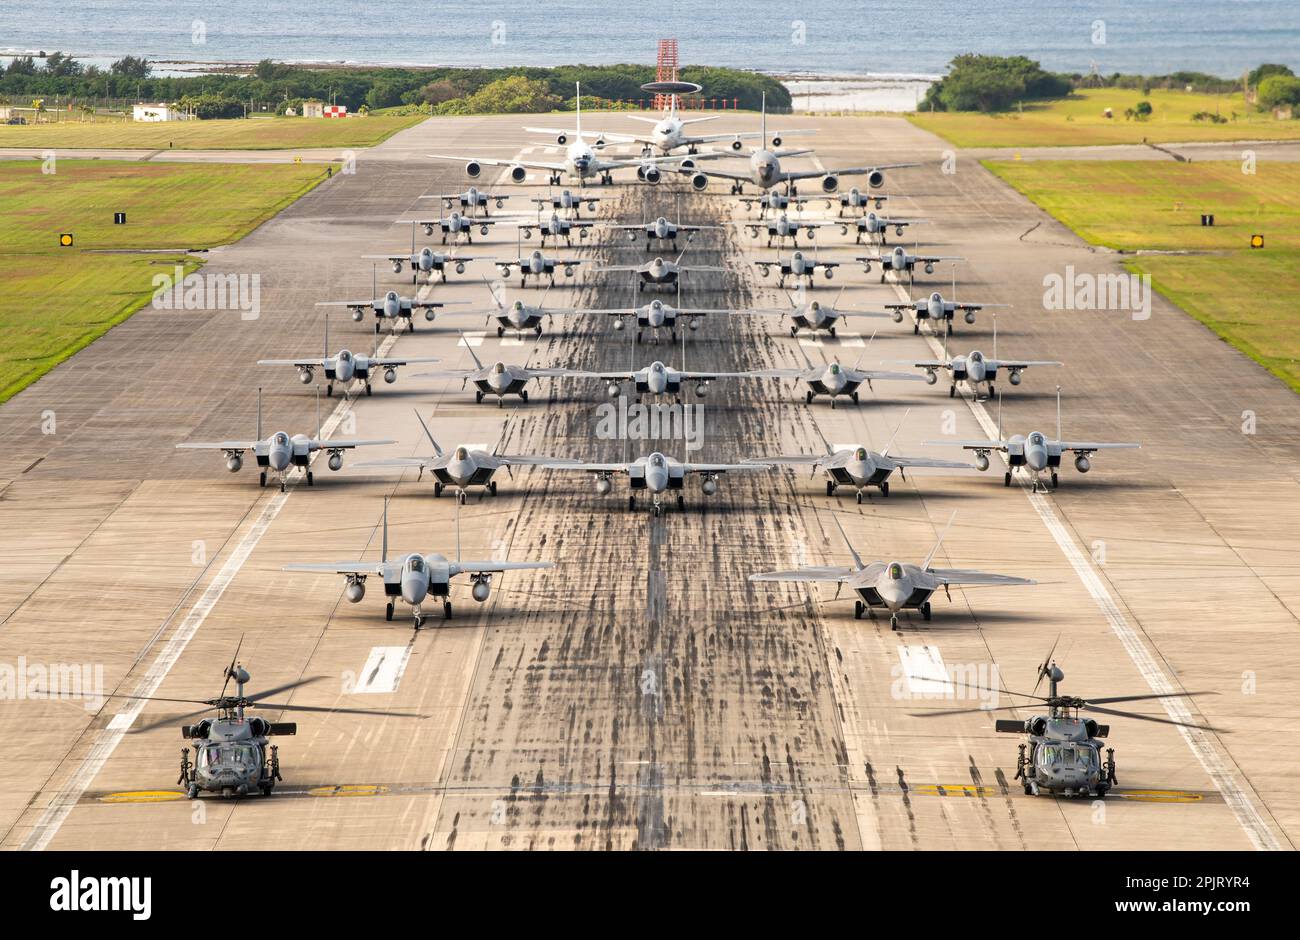 U.S. Air Force aircraft line up on the runway during a capabilities demonstration at Kadena Air Base, Japan, Nov. 22, 2022. Kadena’s ability to rapidly generate U.S. airpower is a vital function of its mission to ensure the stability and security of the Indo-Pacific region. (U.S. Air Force photo by Senior Airman Jessi Roth) Stock Photo